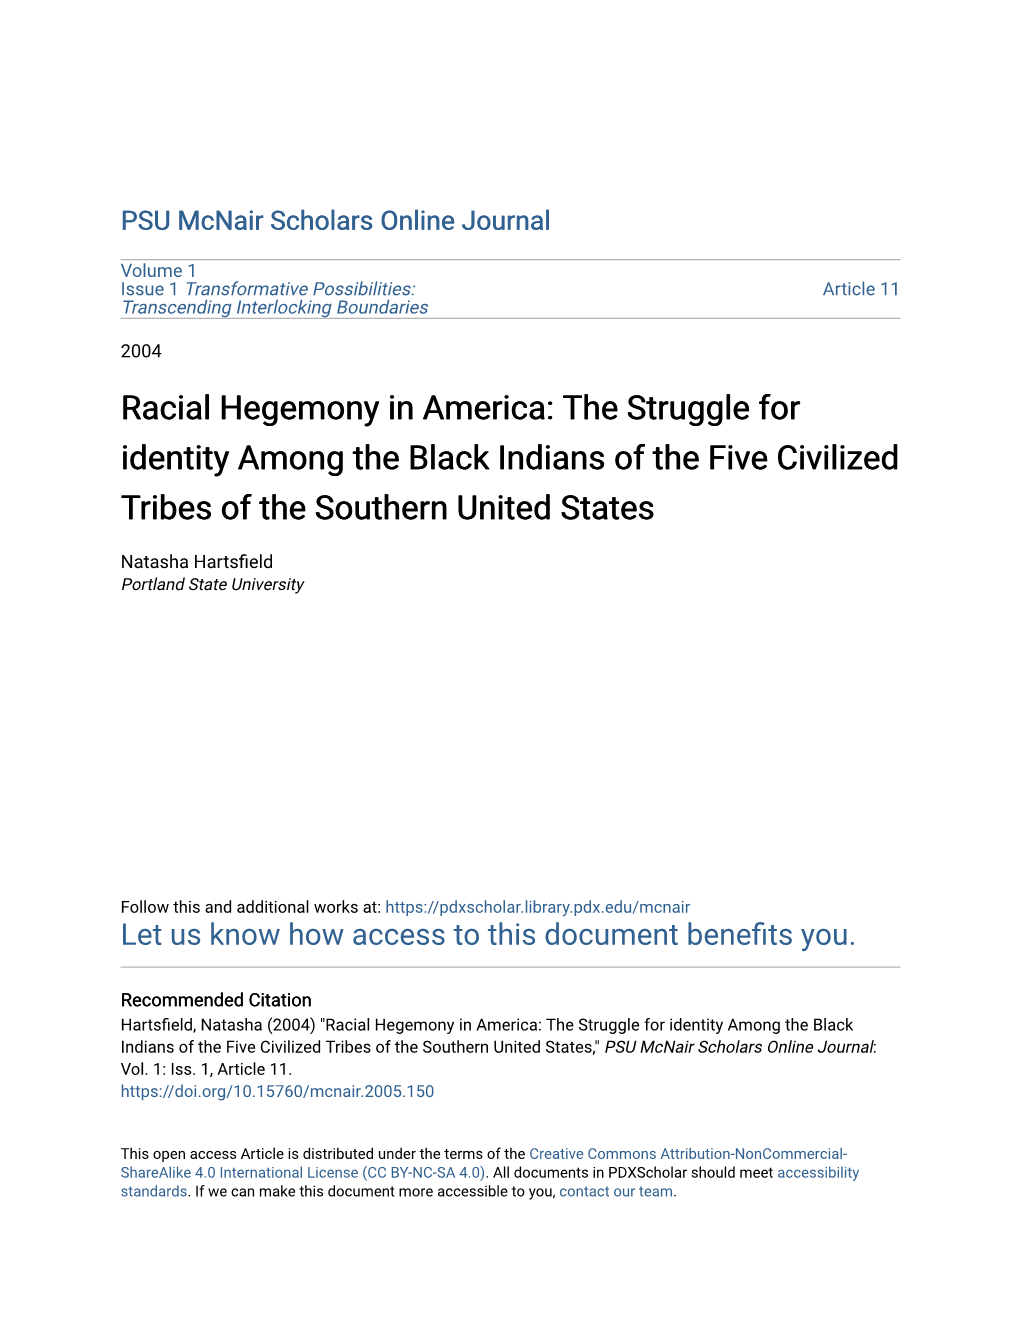 Racial Hegemony in America: the Struggle for Identity Among the Black Indians of the Five Civilized Tribes of the Southern United States